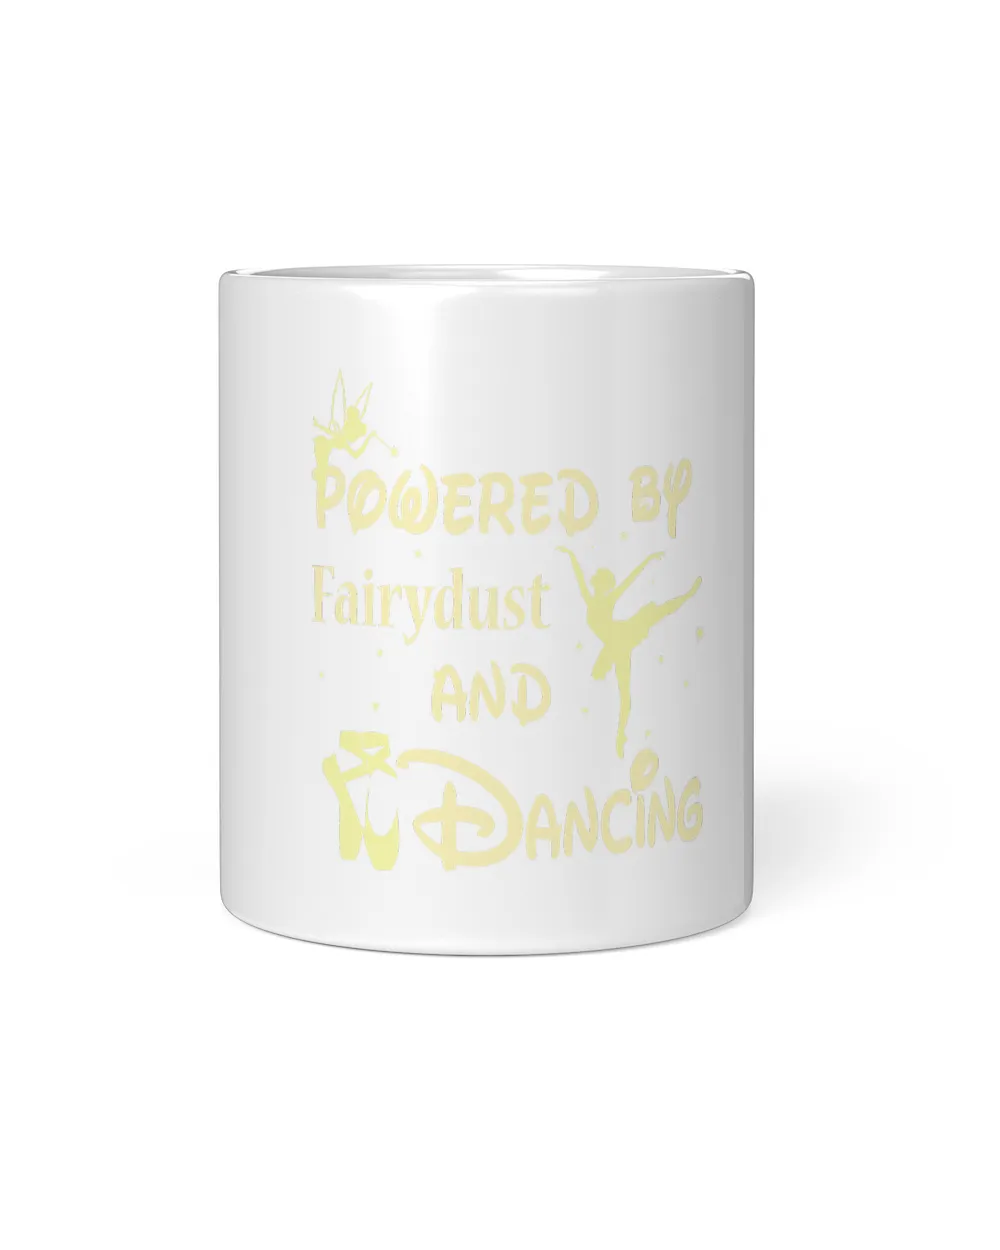 Powered By fairydust and dancing